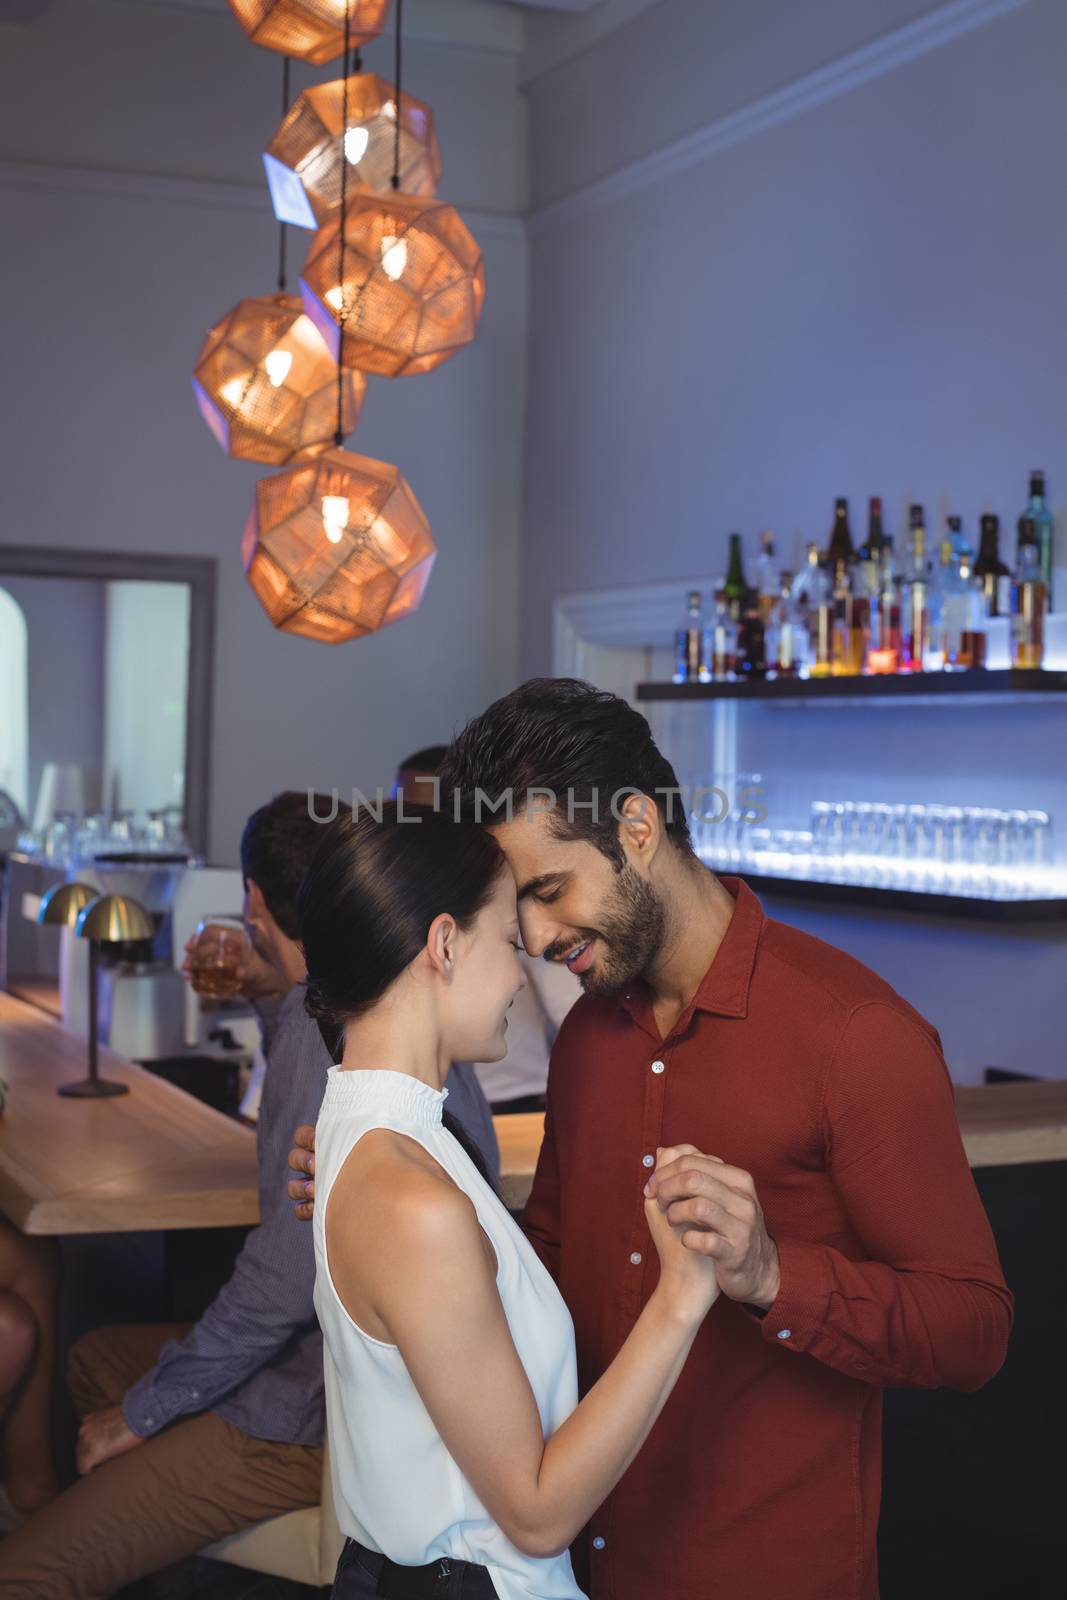 Romantic couple dancing together at bar restaurant